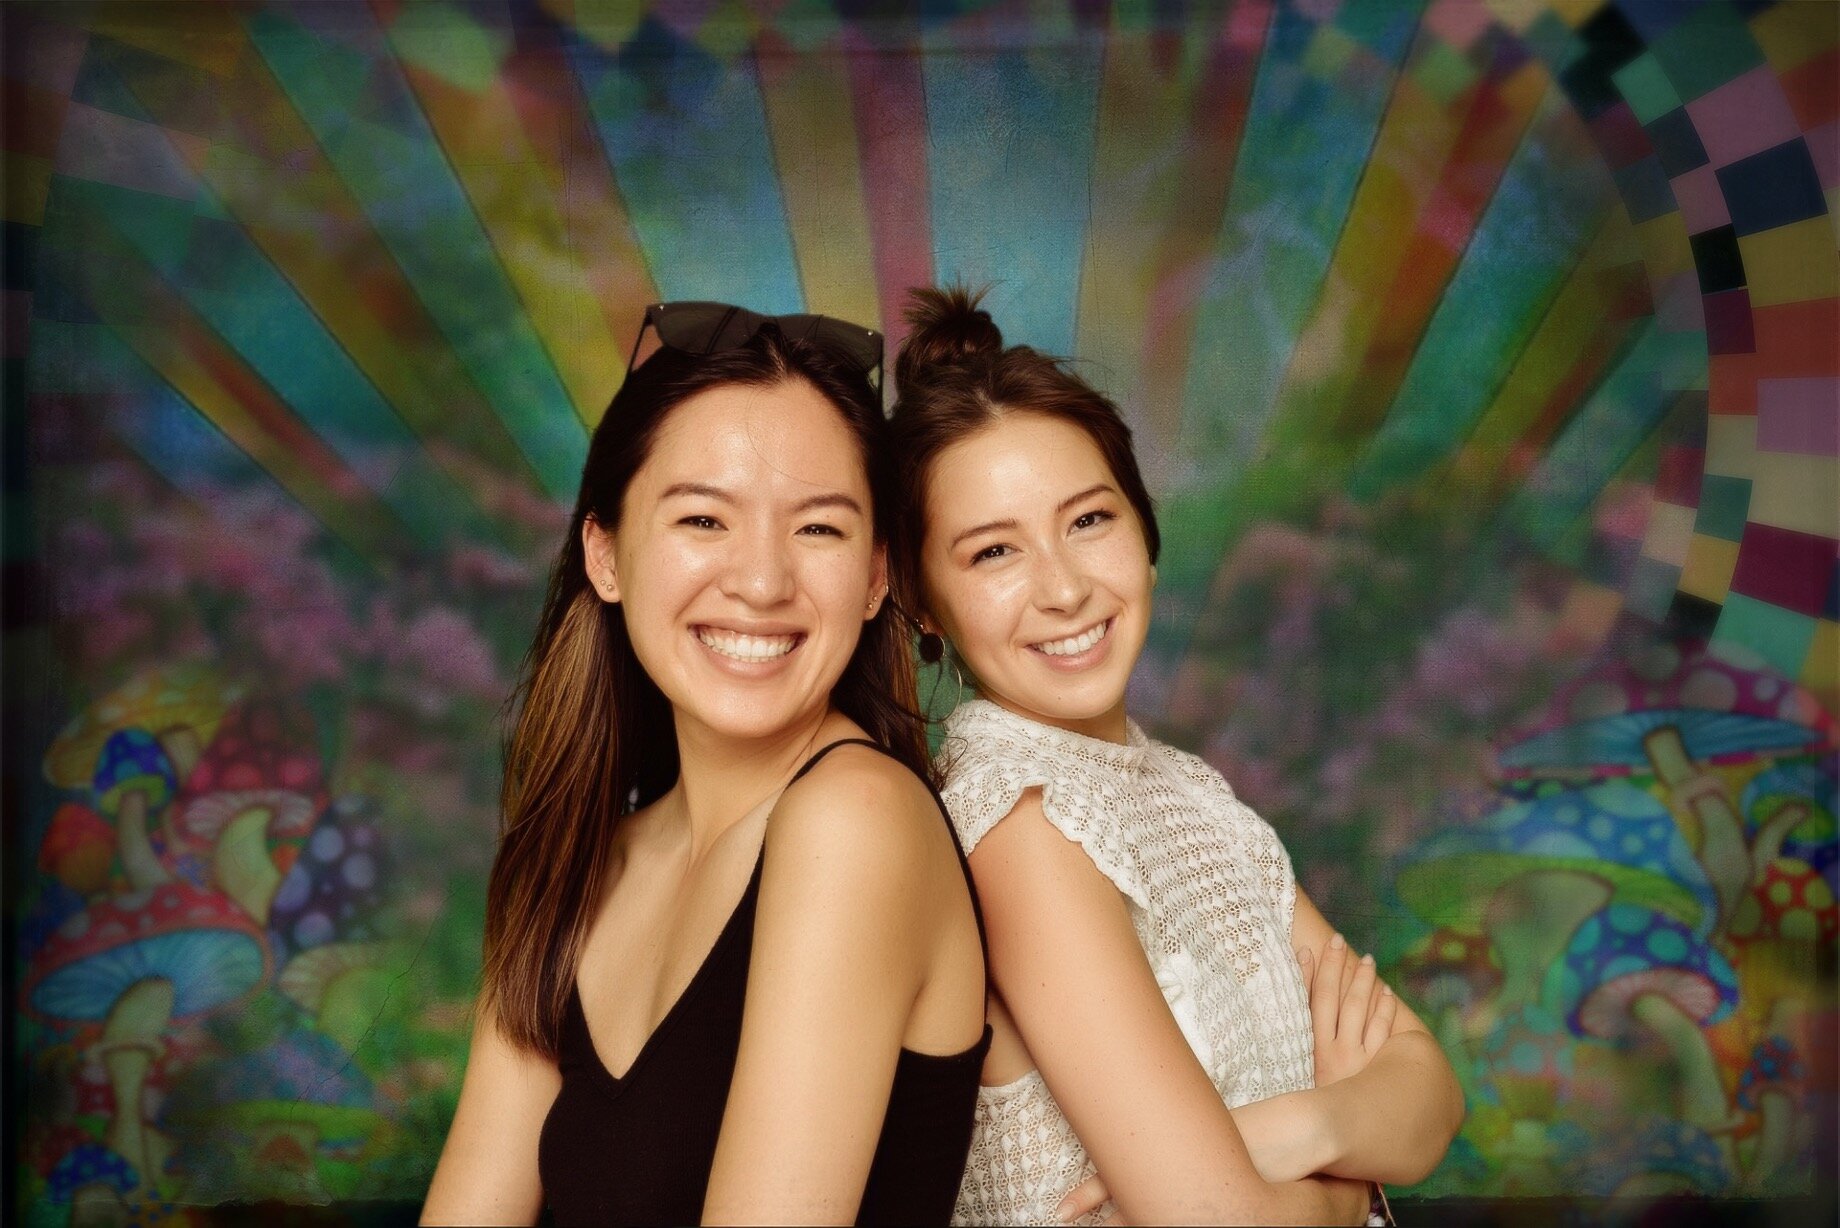 Two smiling girls on colorful backdrop